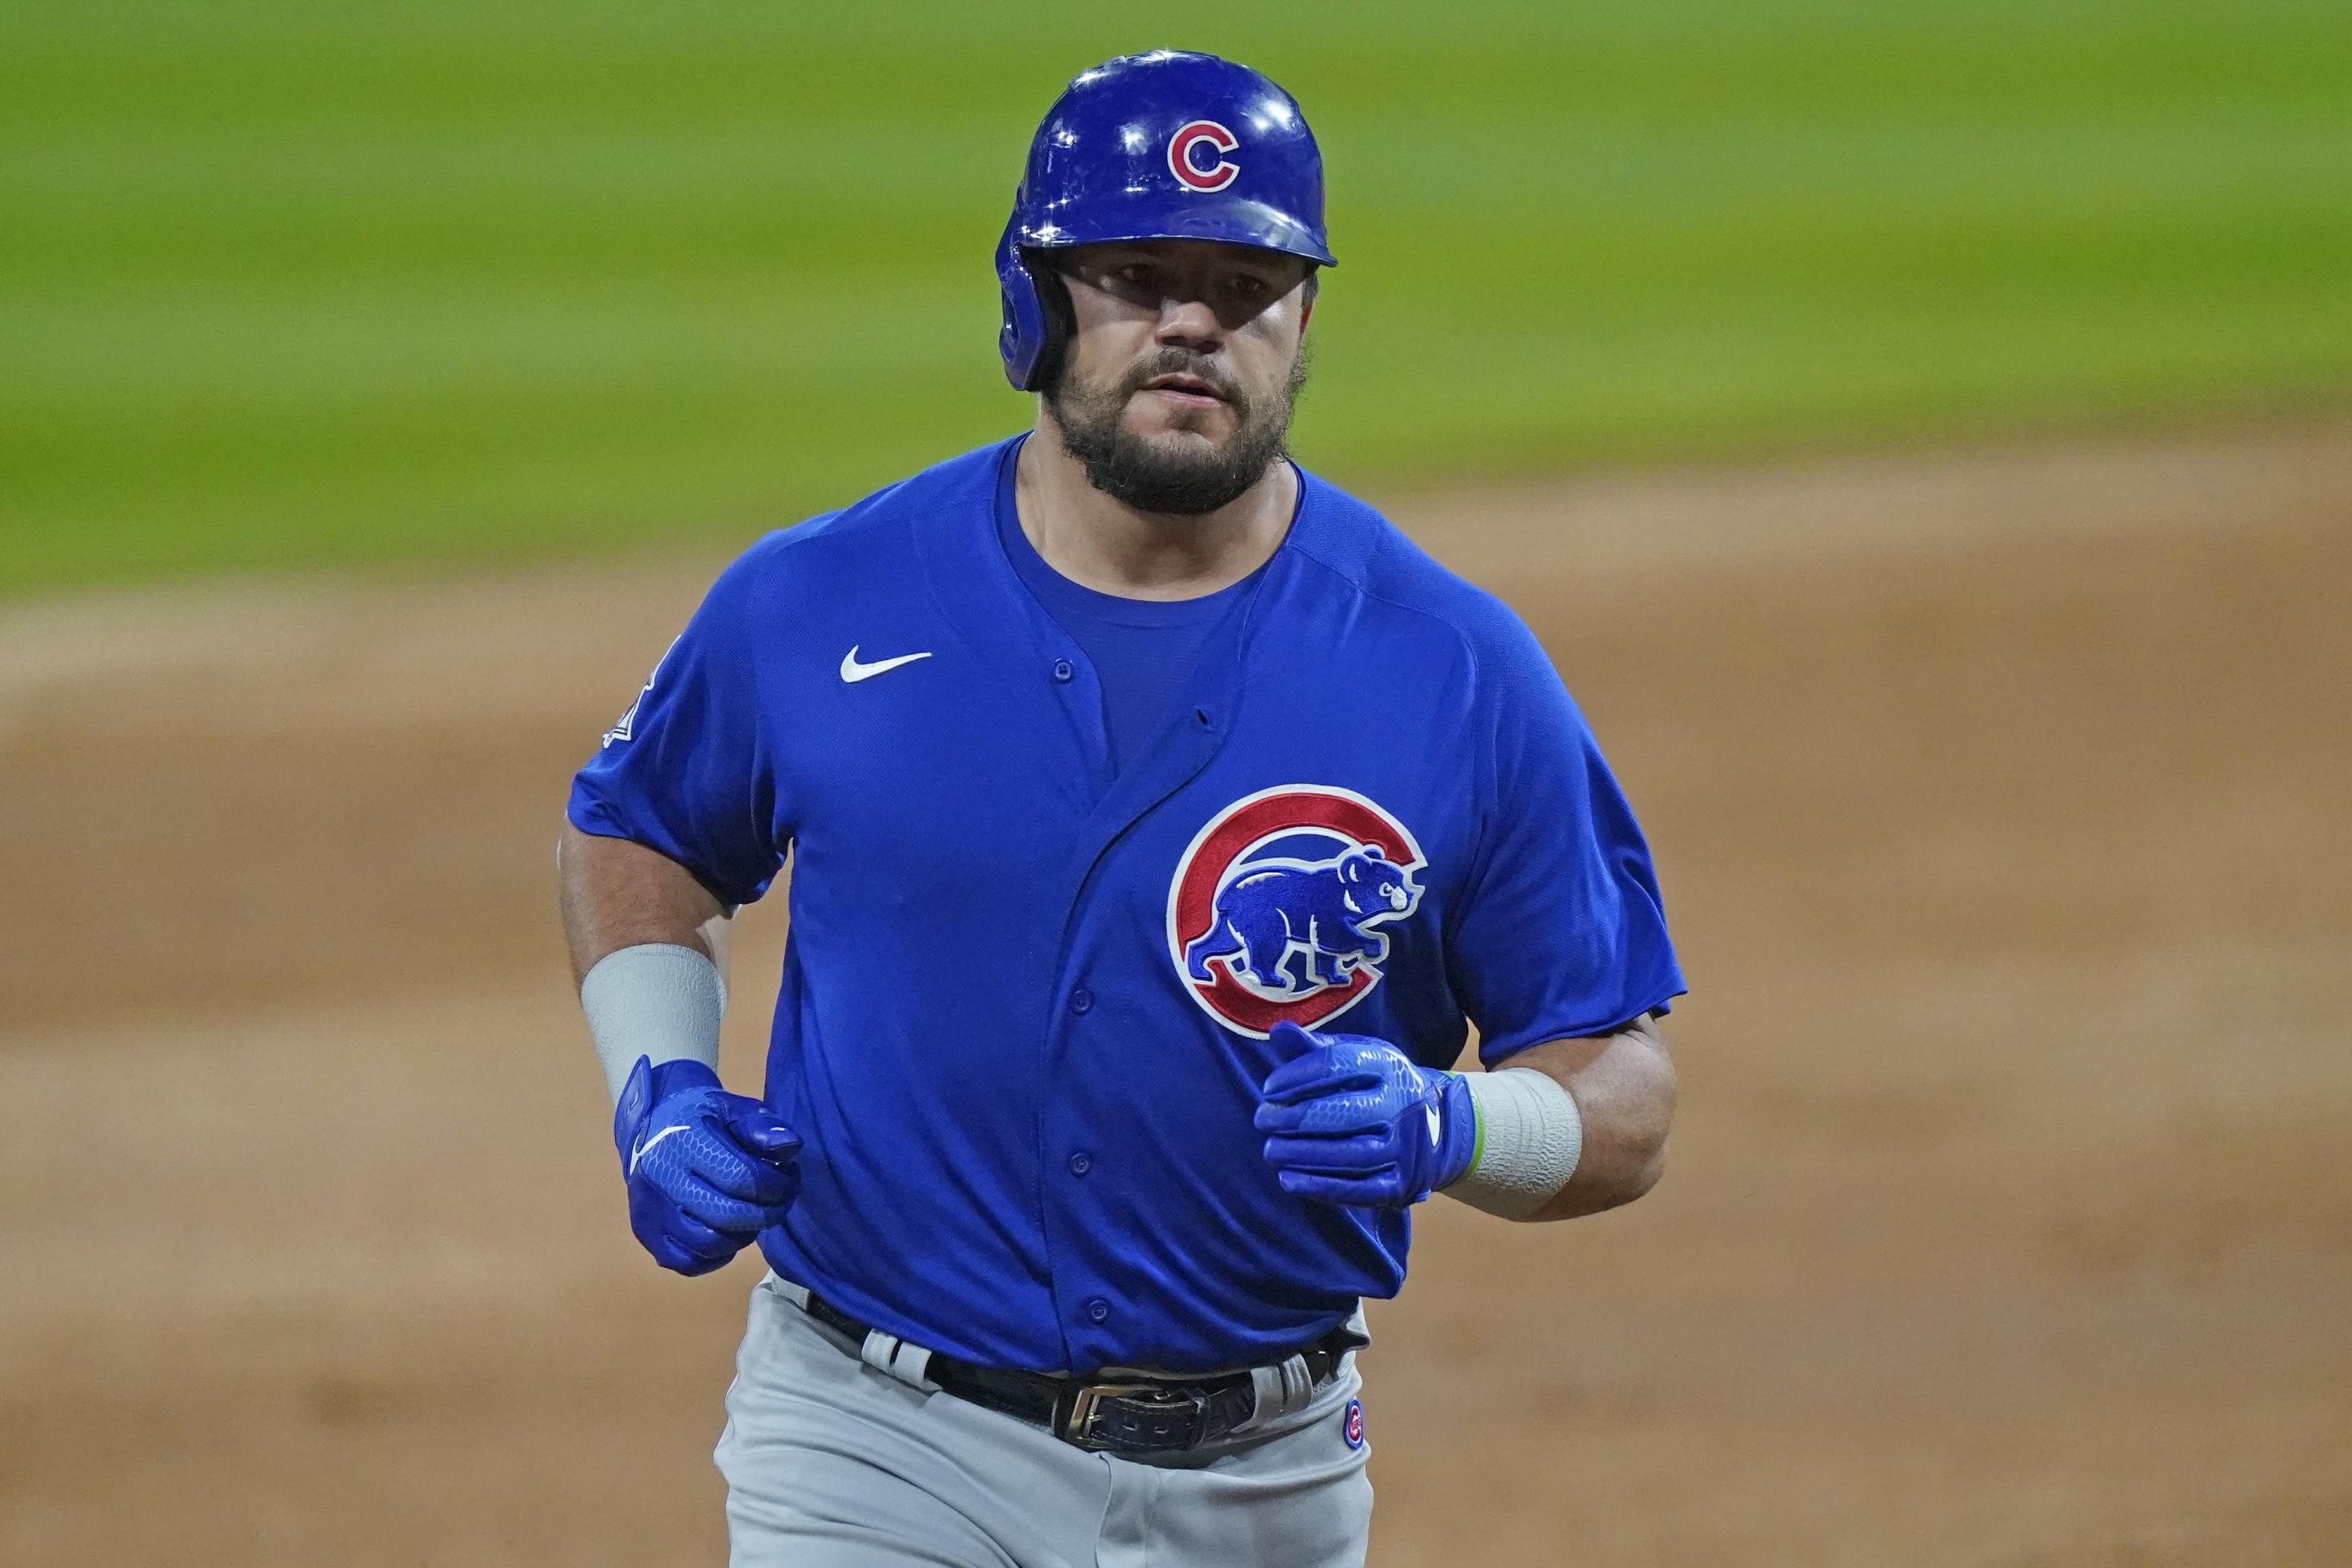 Kyle Schwarber becoming a Cubs legend in World Series